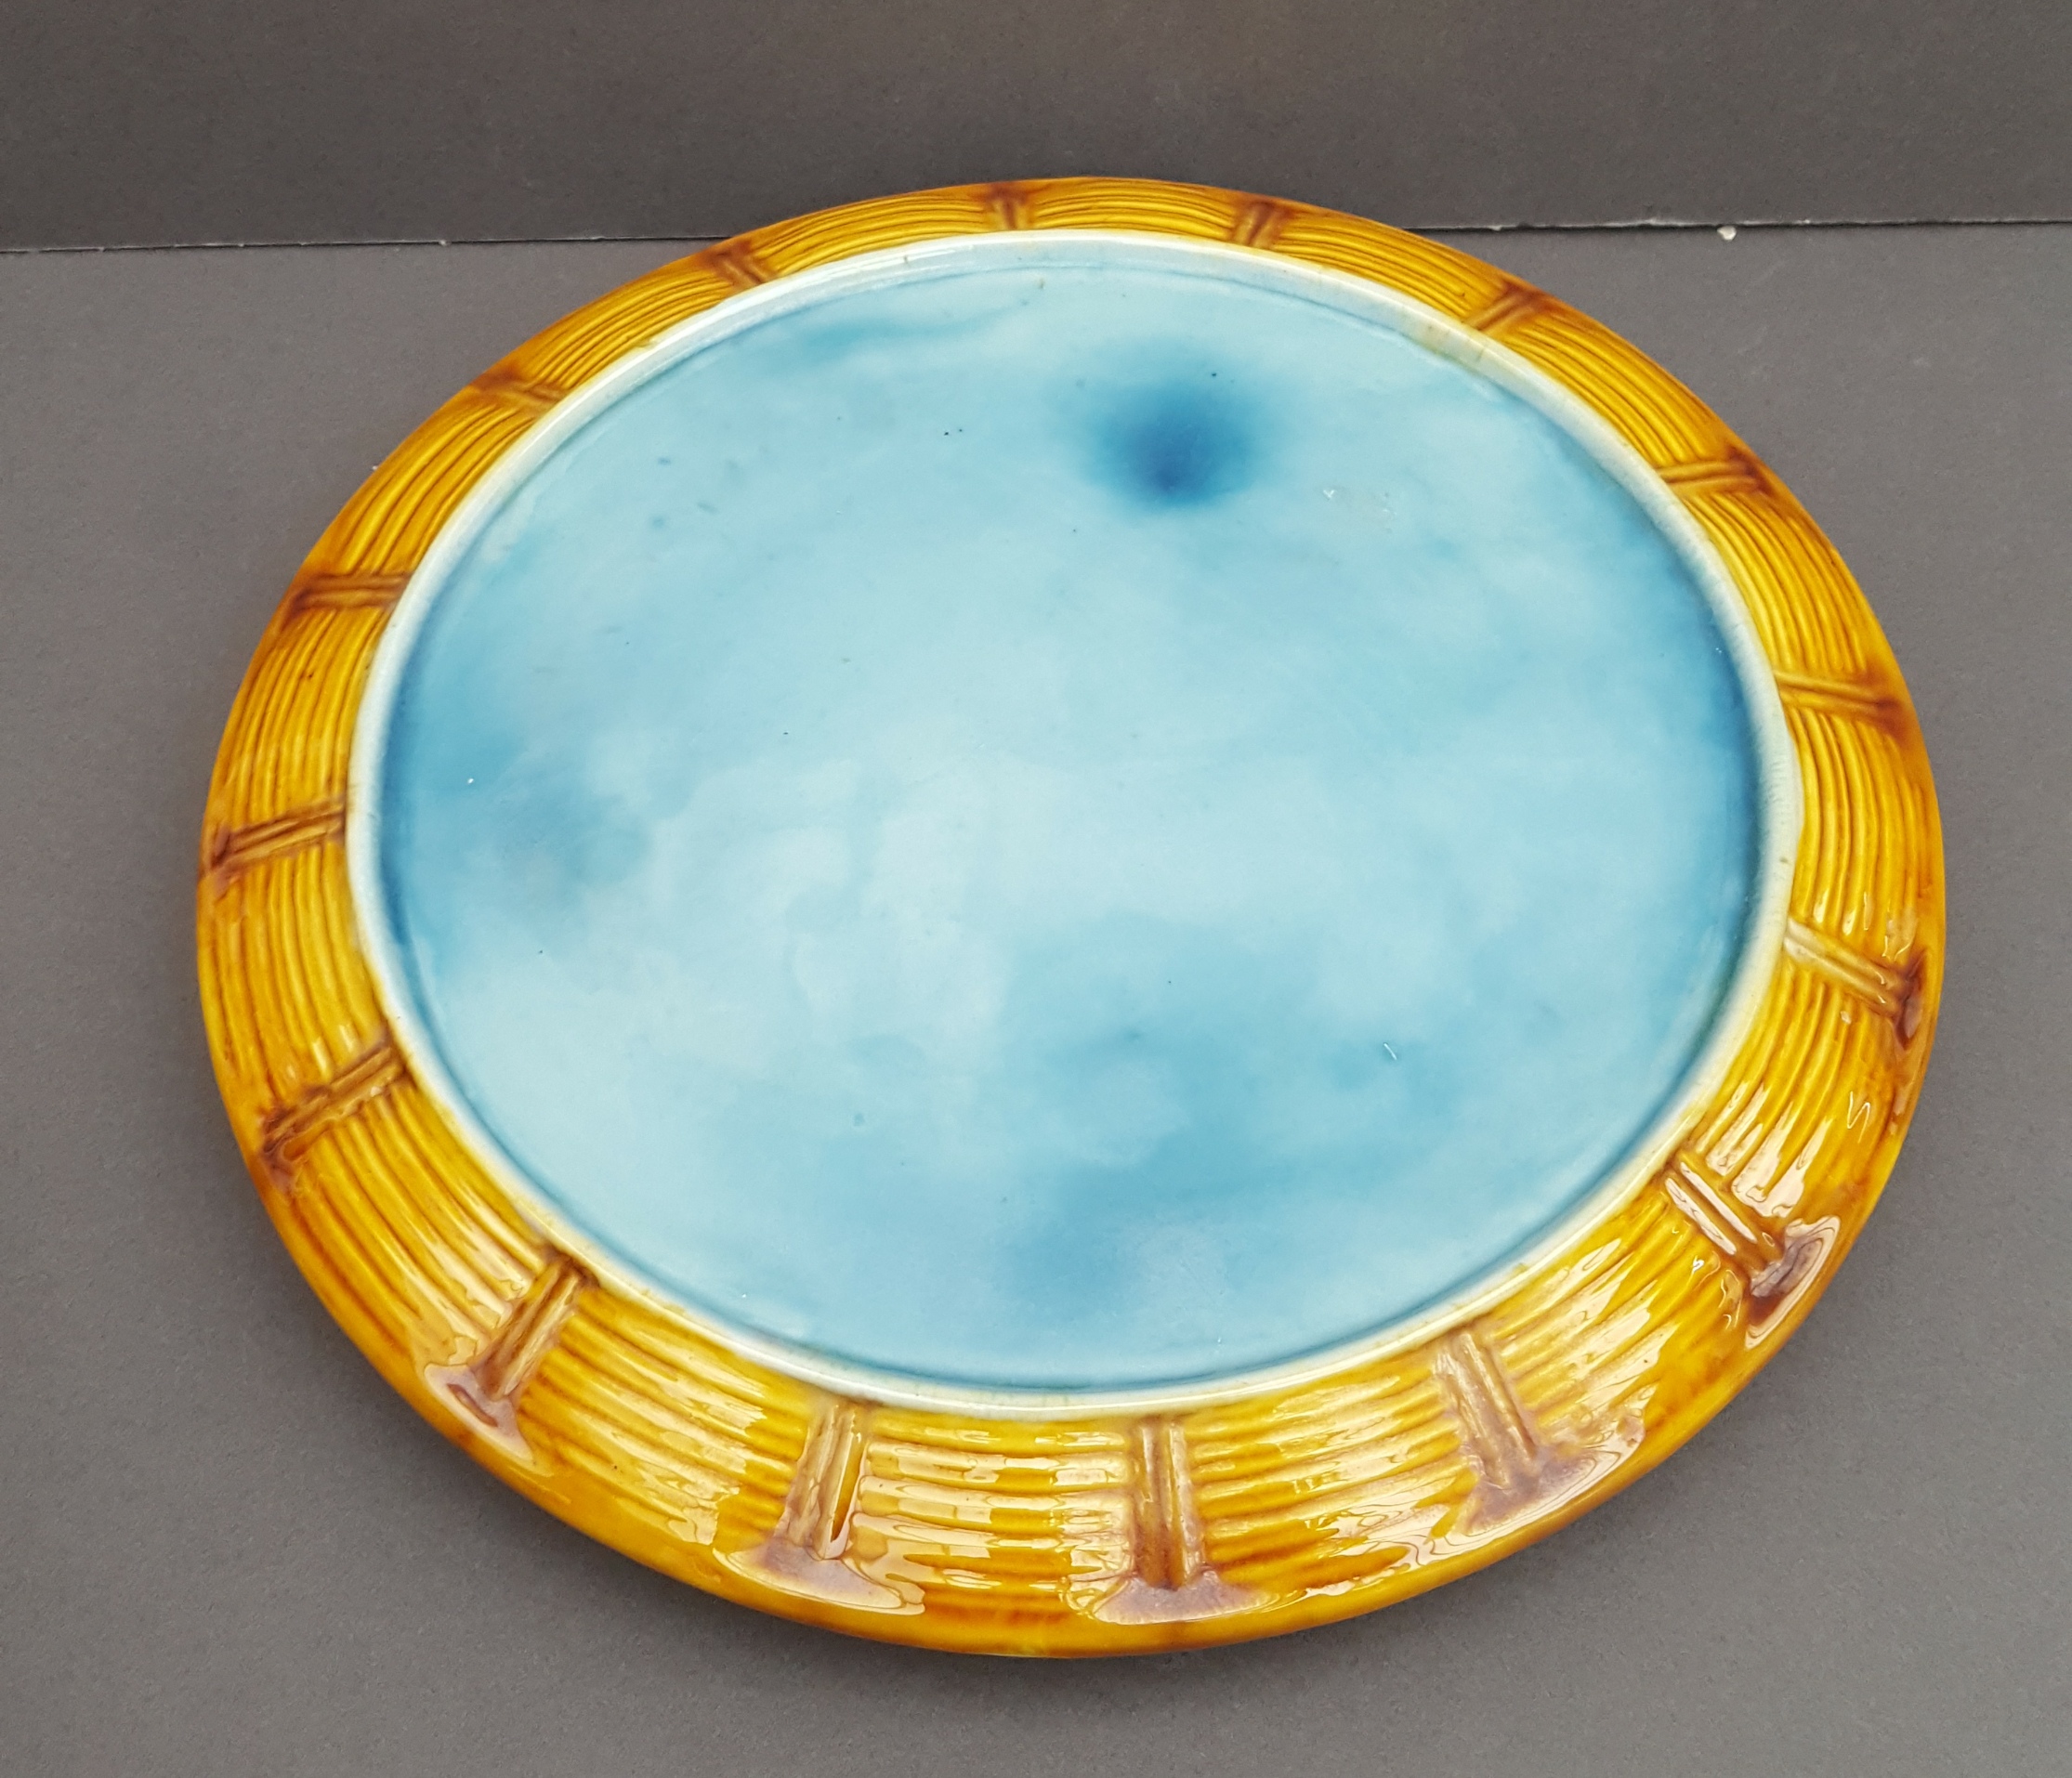 Antique Large Majolica Cheese Dish in the style of George Jones - Image 3 of 4